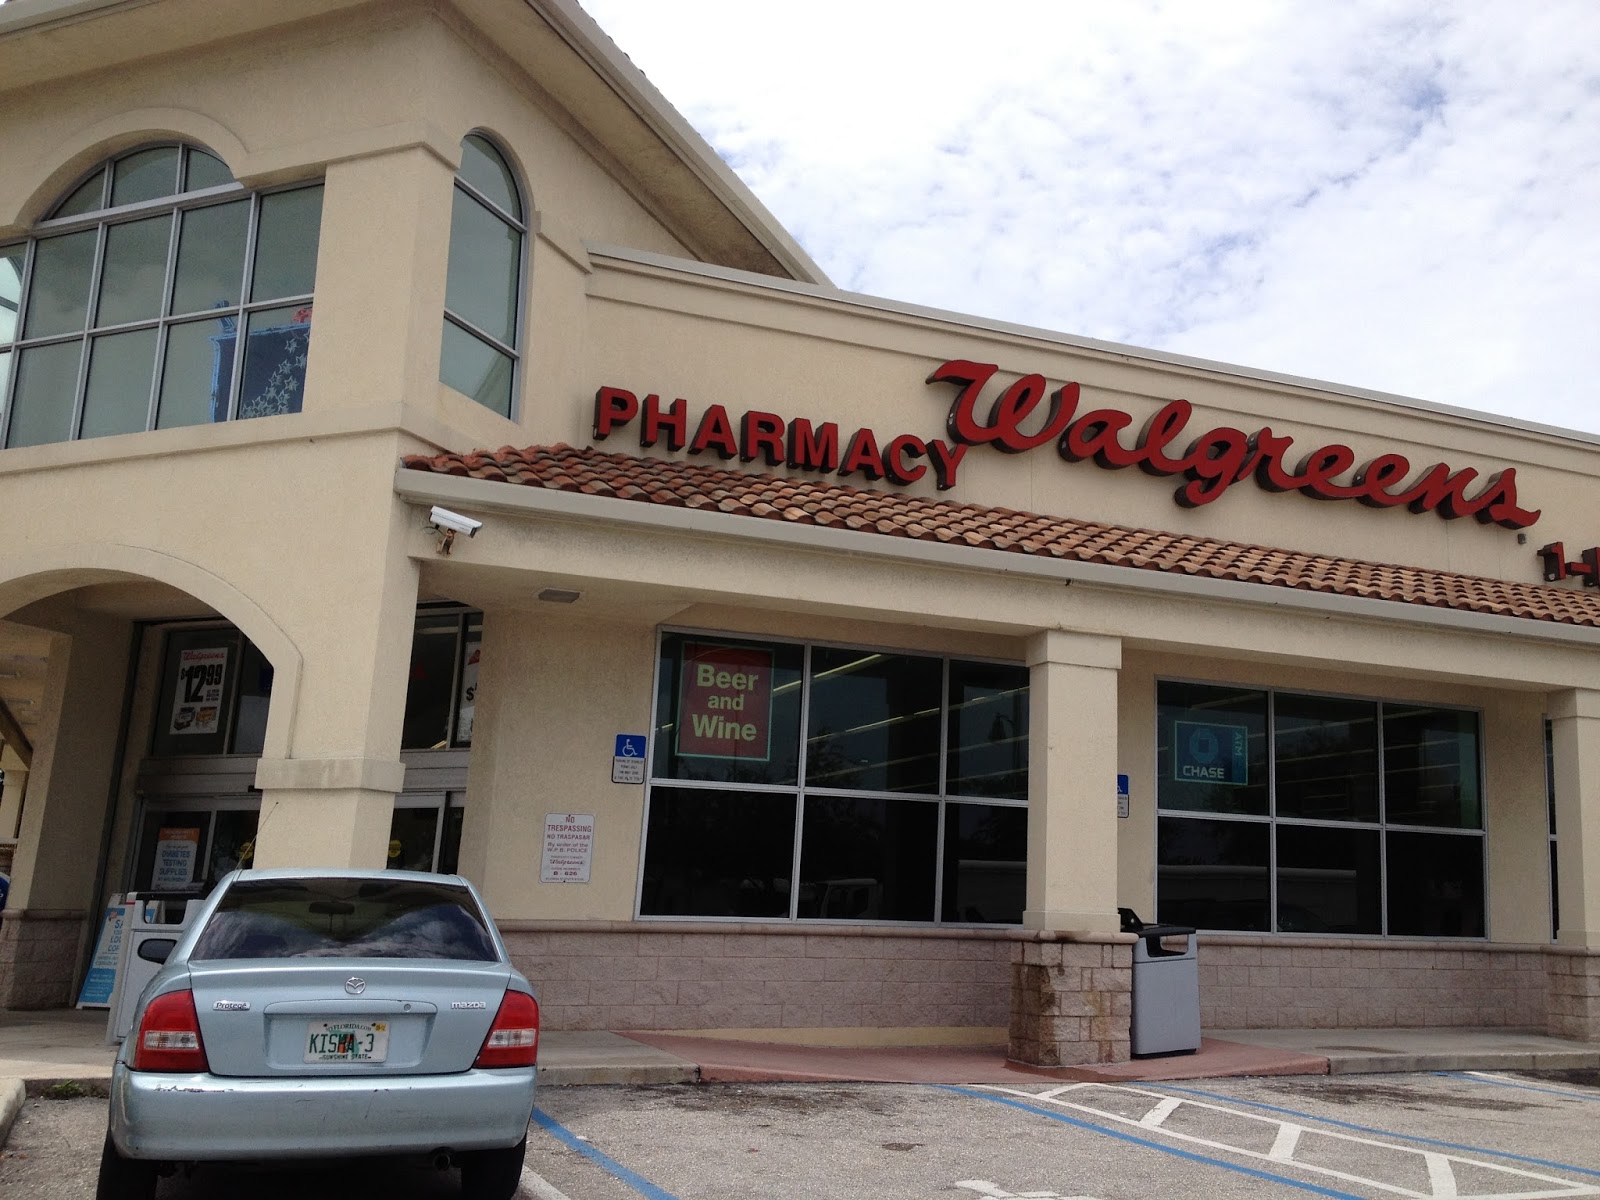 The Wag - The Walgreens Blog: Walgreen's (45th & Broadway) West Palm ...